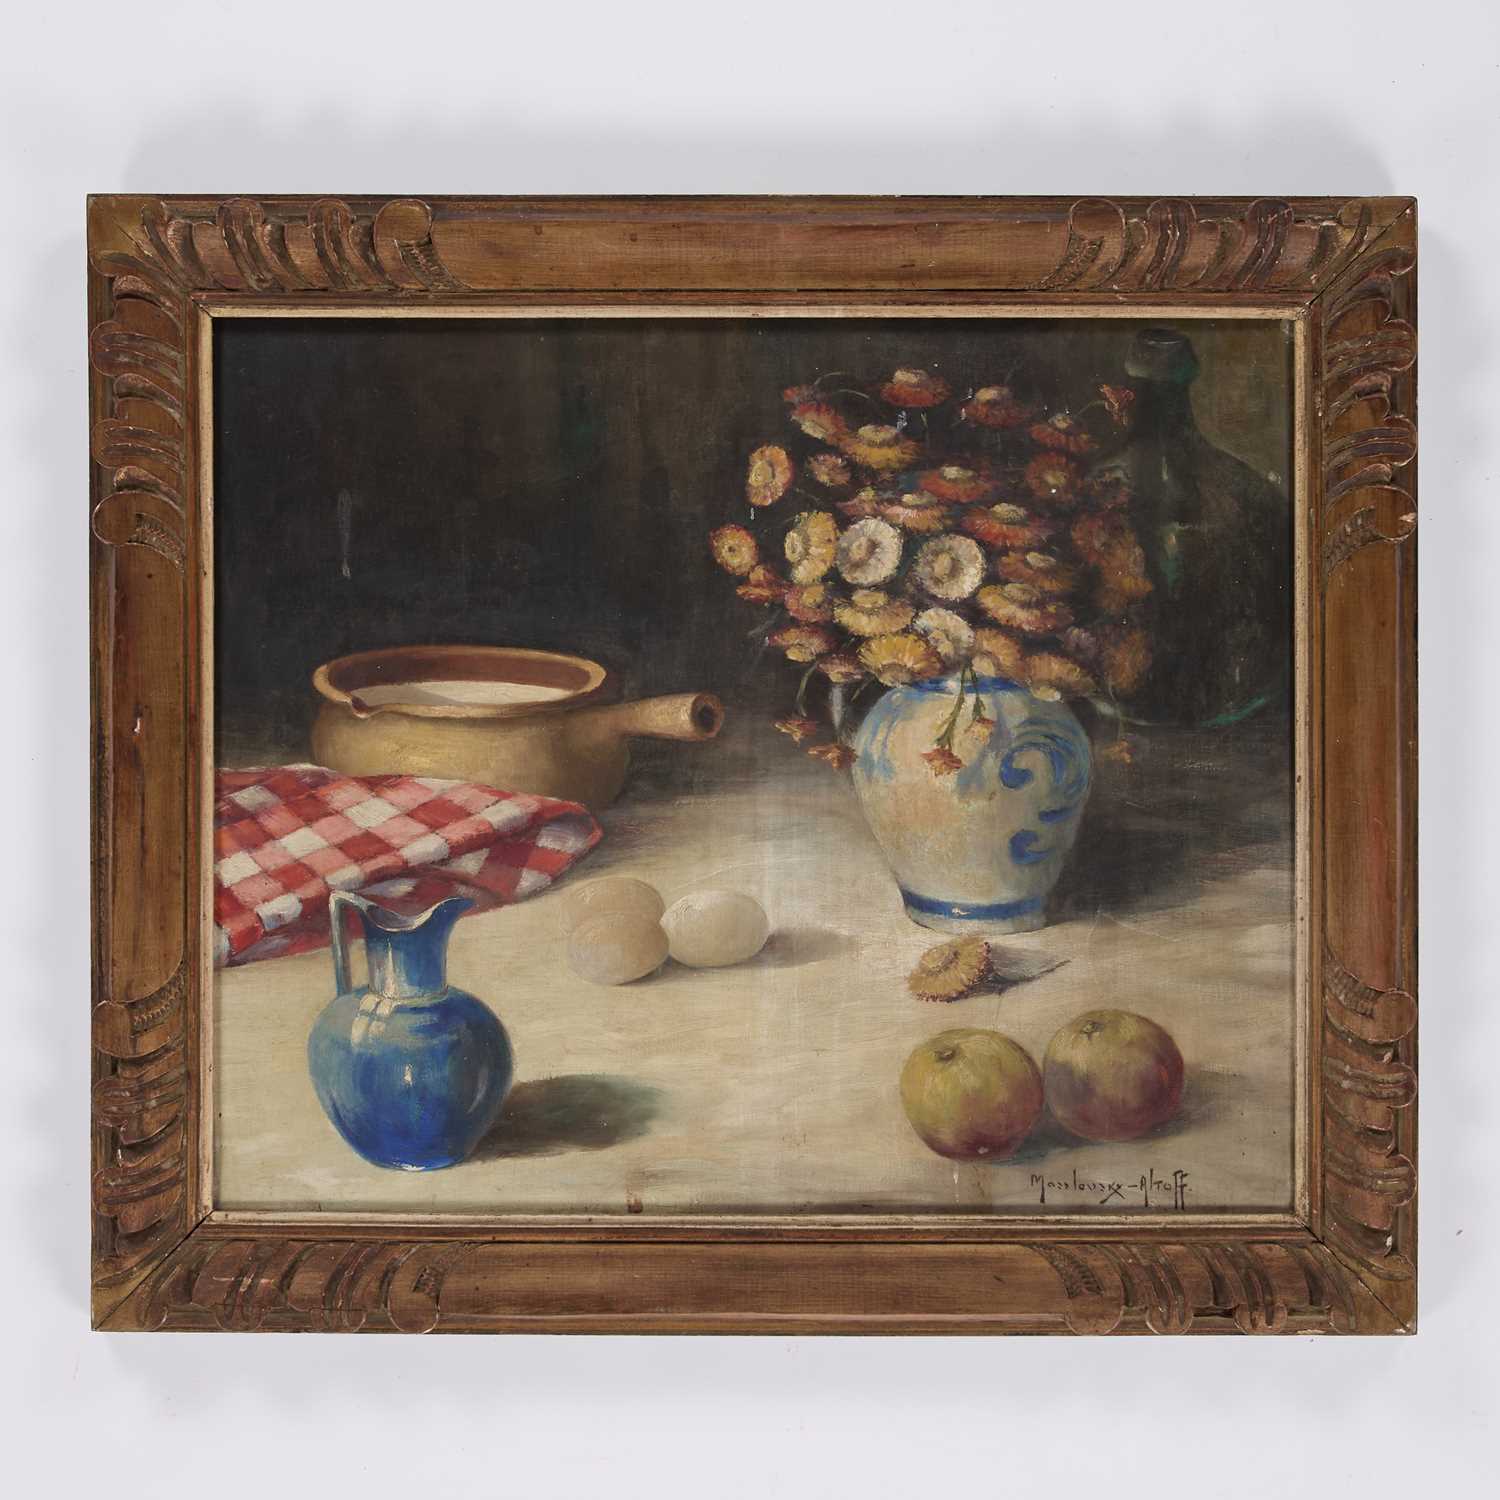 MASSLOUSKY ALTOFF (20TH CENTURY) STILL LIFE WITH FLOWERS, EGGS AND FRUIT - Image 2 of 3